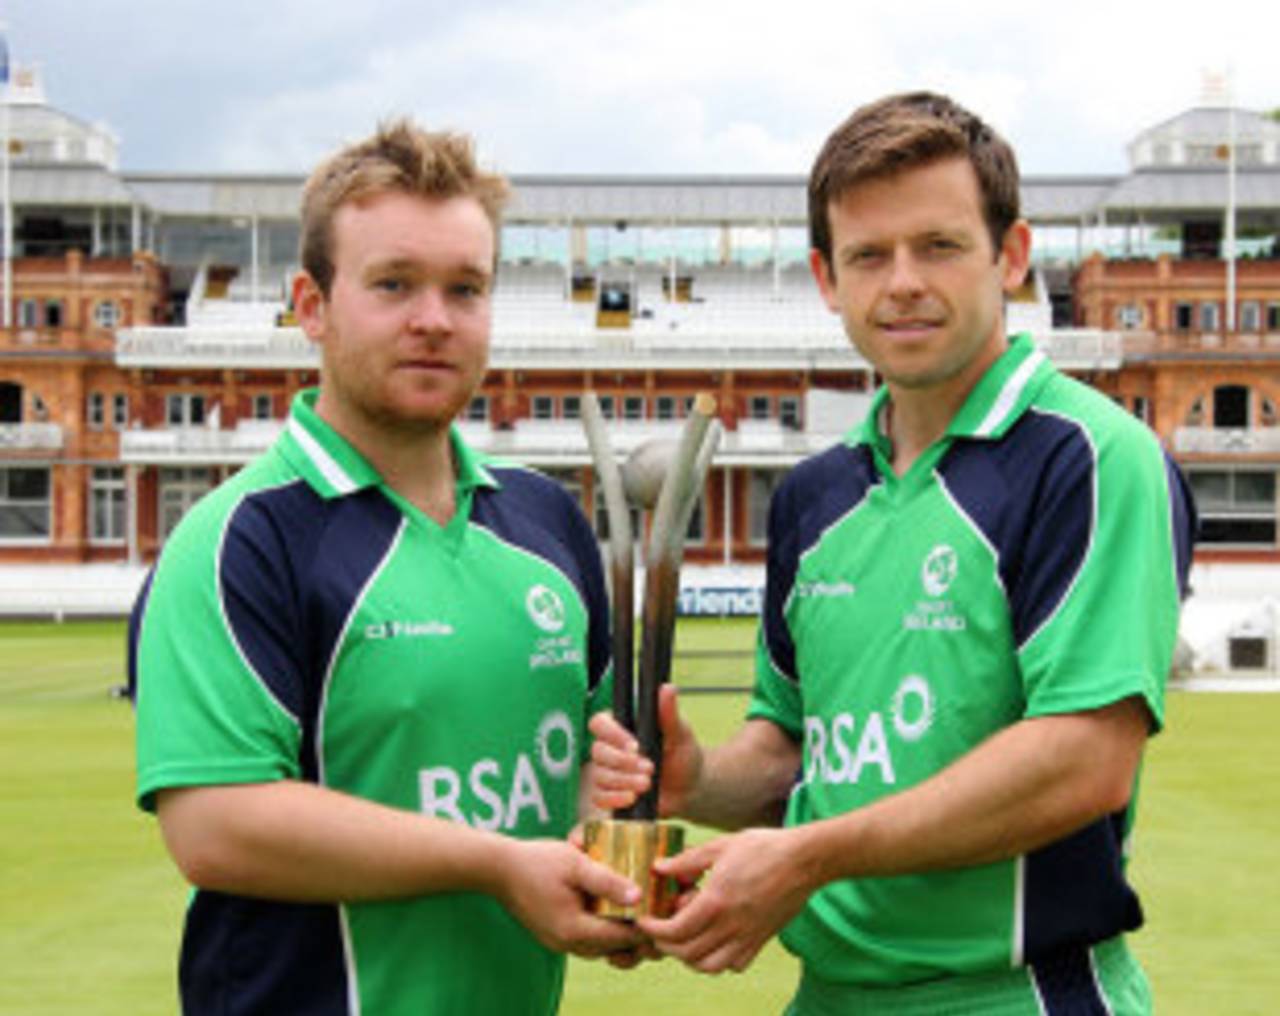 Paul Stirling and Ed Joyce launch the RSA Challenge which will be played against England, Lord's, July 3, 2013